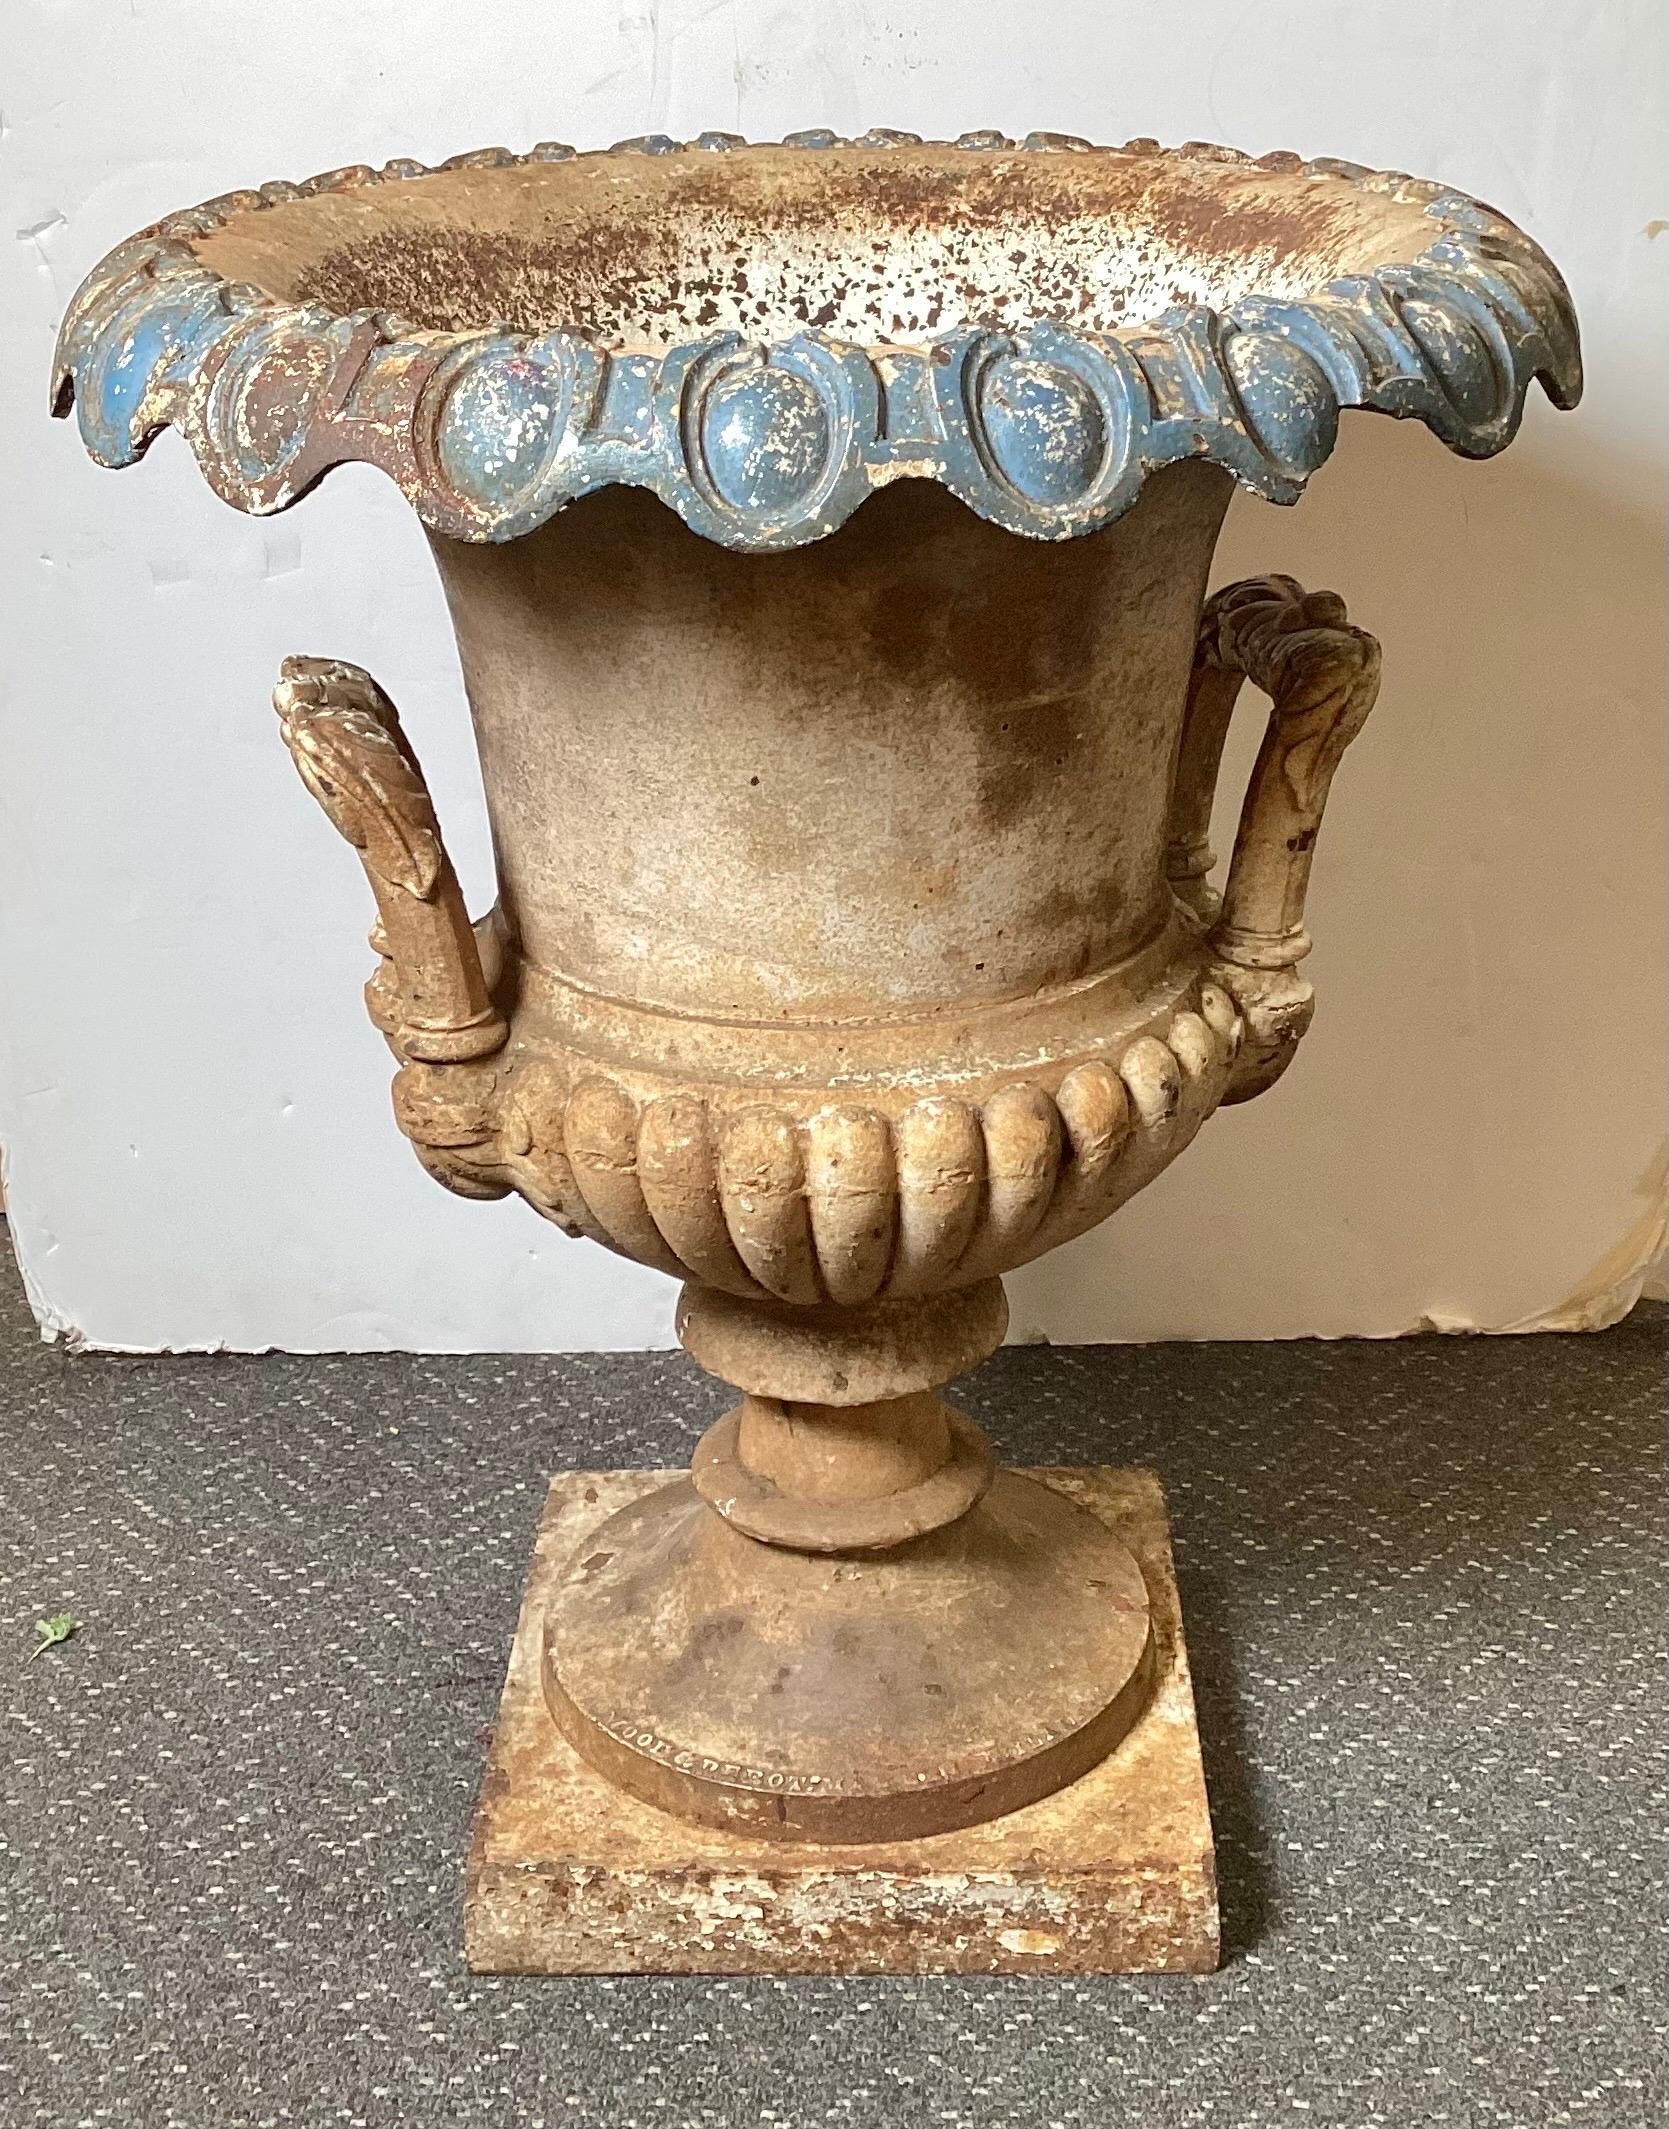 A Mid-19th century cast iron cold painted garden urn. Made by wood and Perot with a mark dating this to PRE 1865. A famous maker from Philadelphia of excellent made iron garden ornaments. The surface with old worn paint and surface oxidation. There